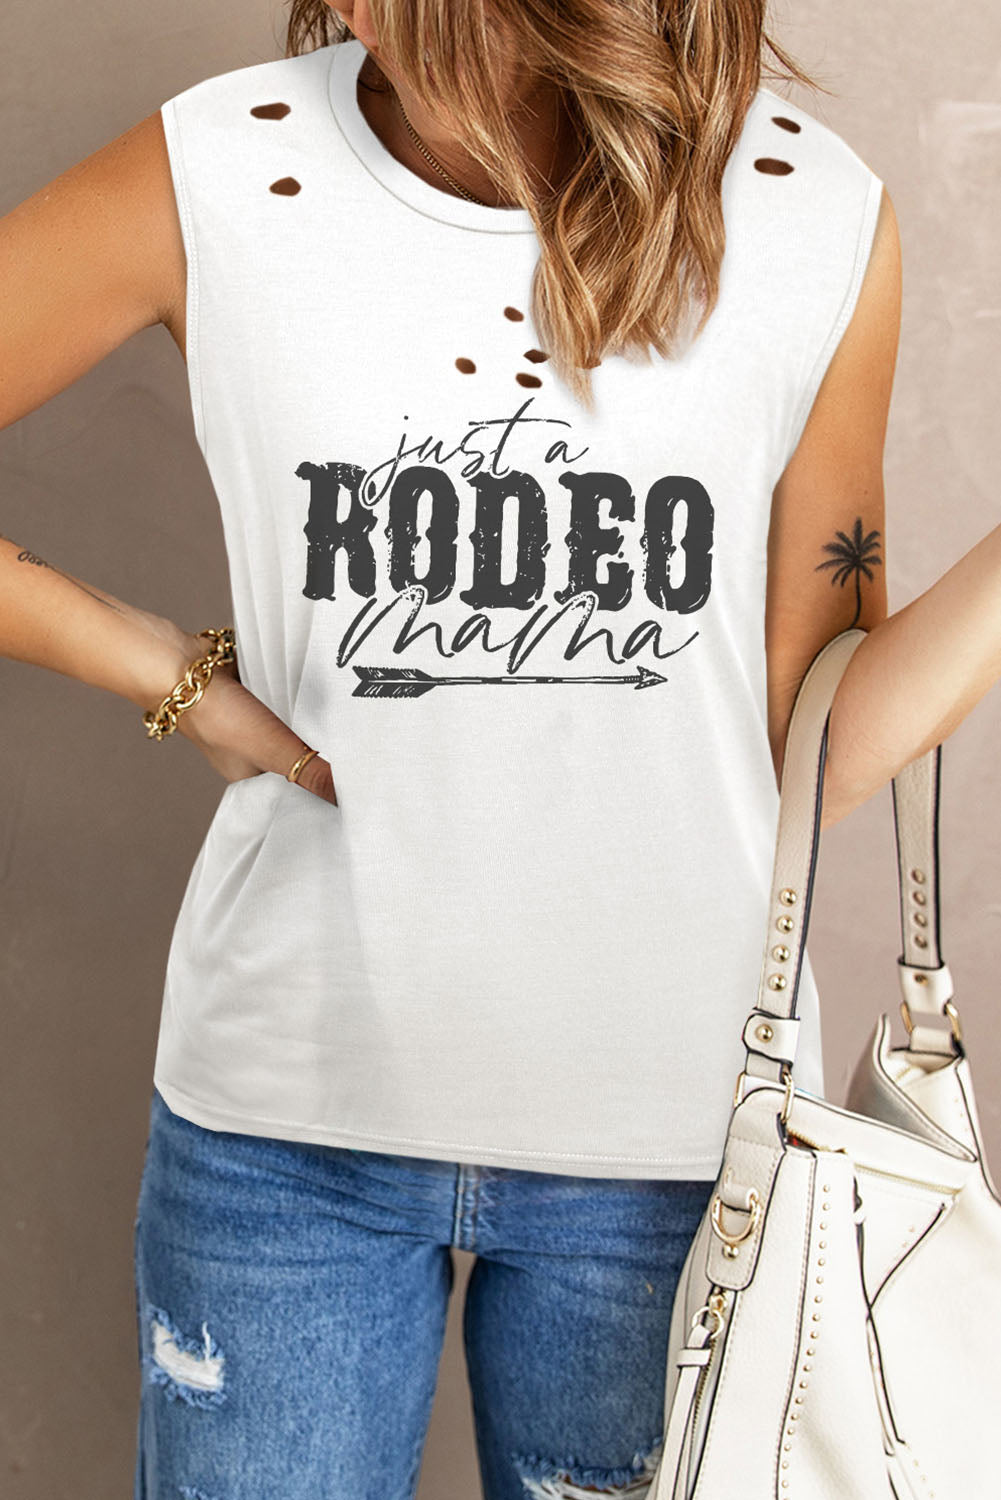 JUST A RODEO MAMA Graphic Distressed Tank